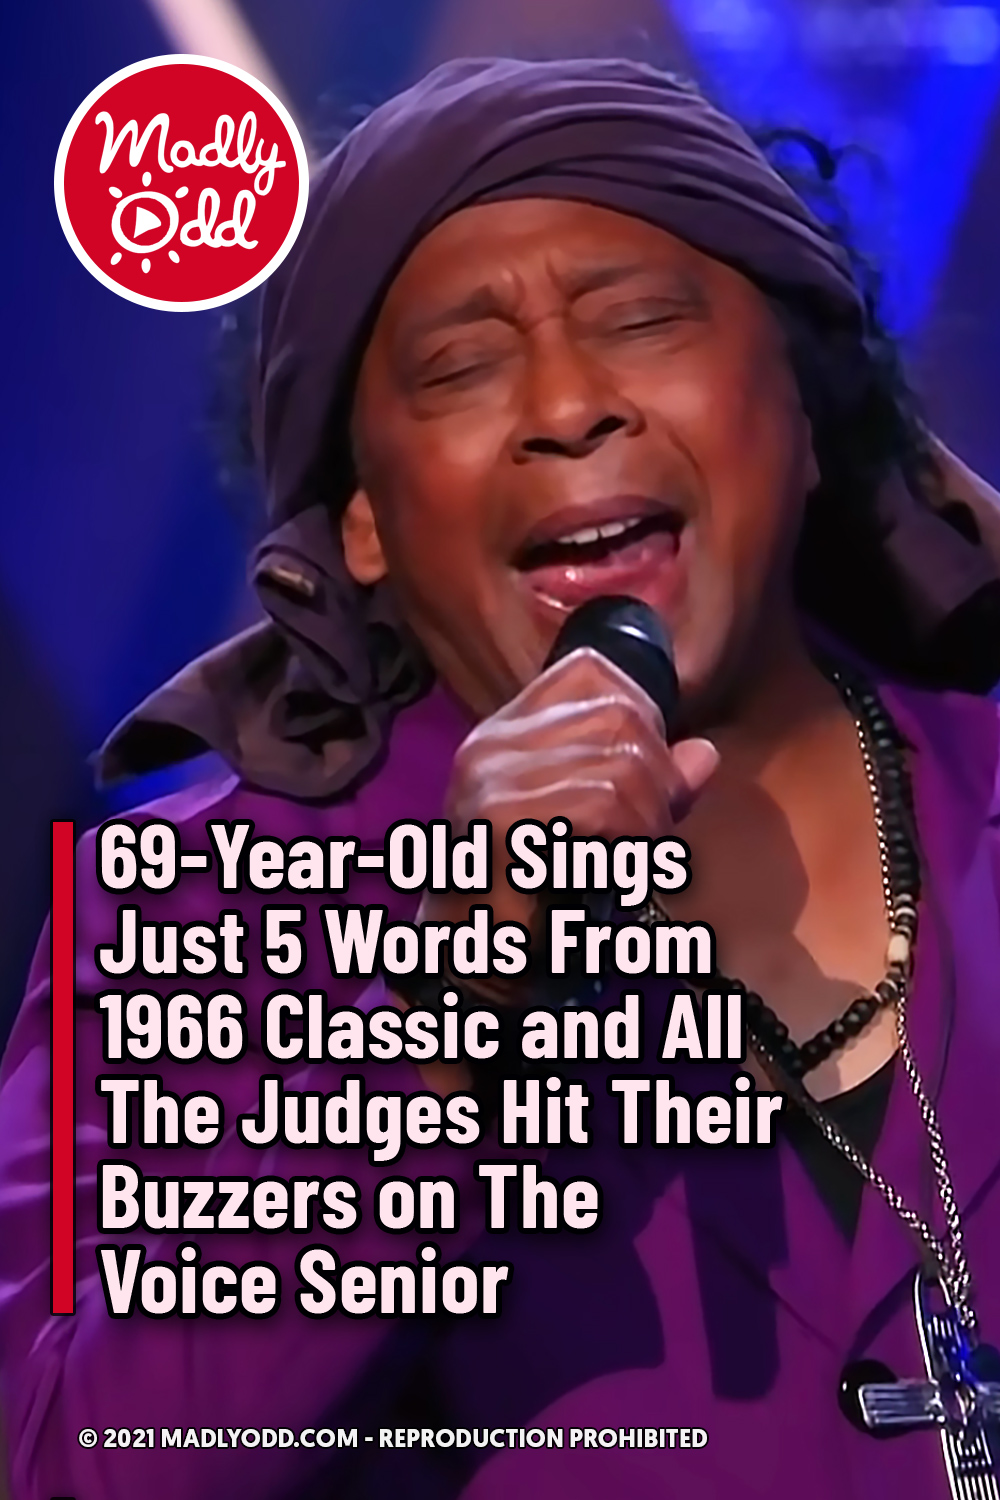 69-Year-Old Sings Just 5 Words From 1966 Classic and All The Judges Hit Their Buzzers on The Voice Senior